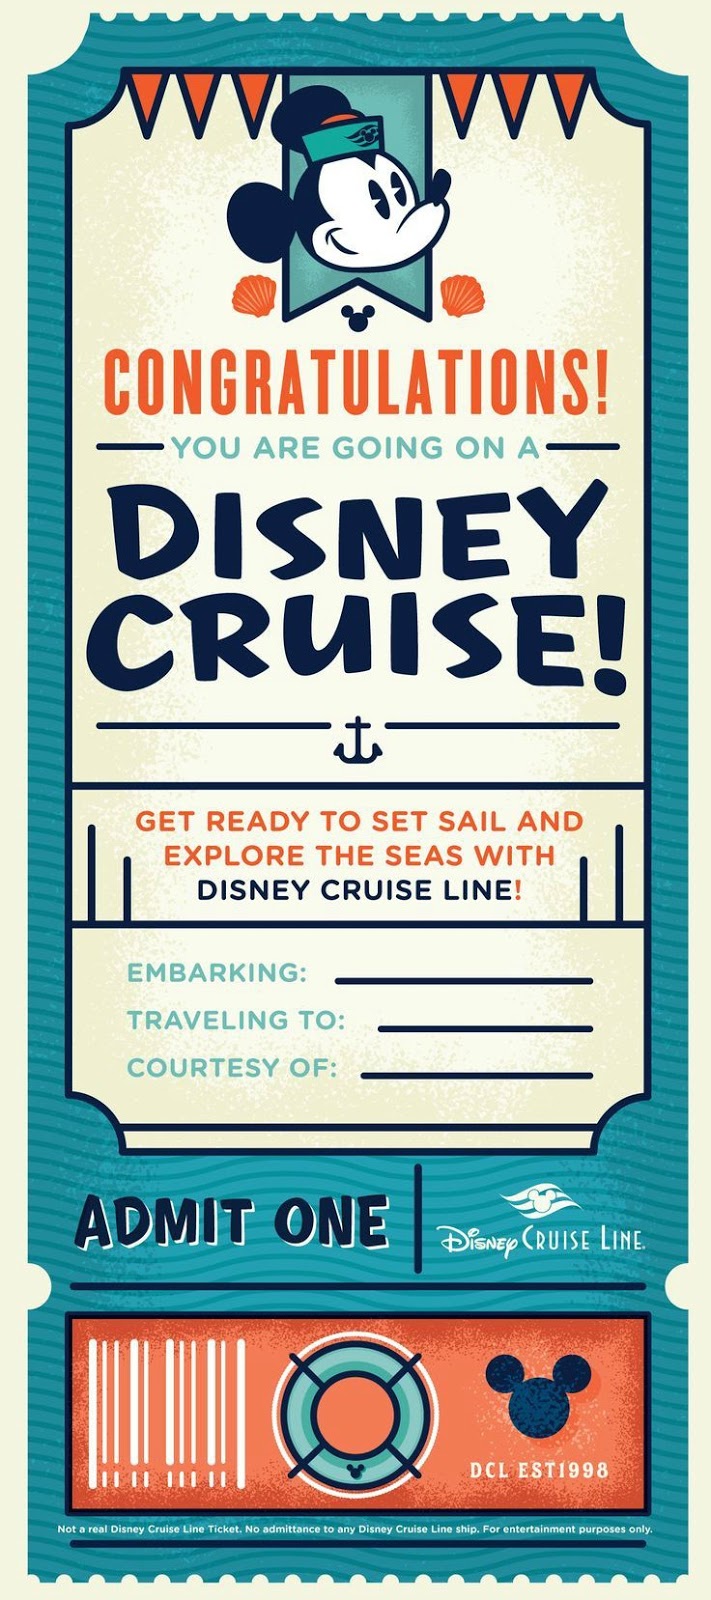 Organized Chaos We are going on a Disney Cruise!!